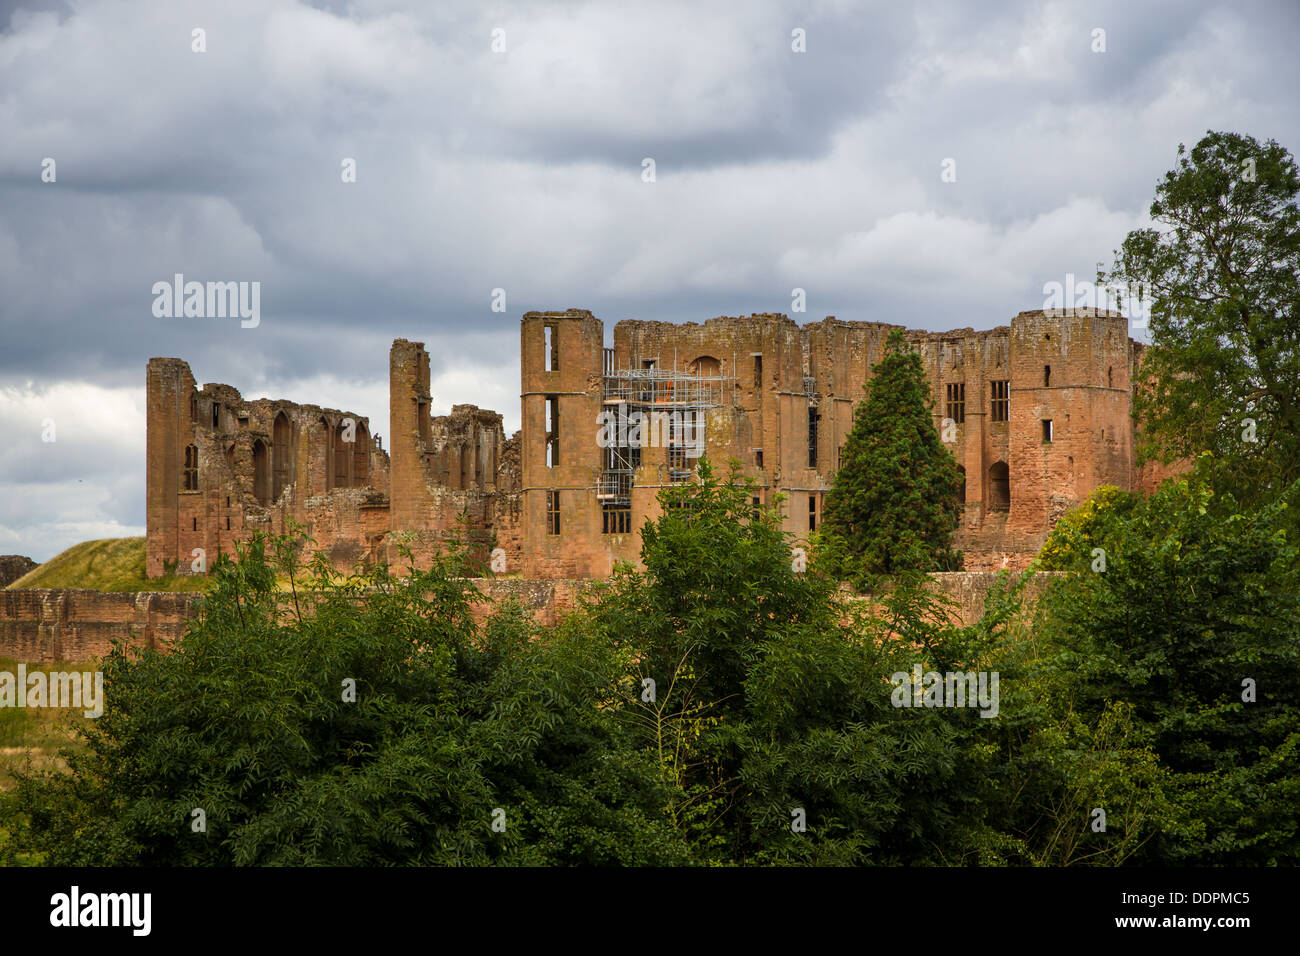 The ruins of Kenilworth Castle in Warwickshire, England. Image shows work being carried out on the viewing platform project Stock Photo